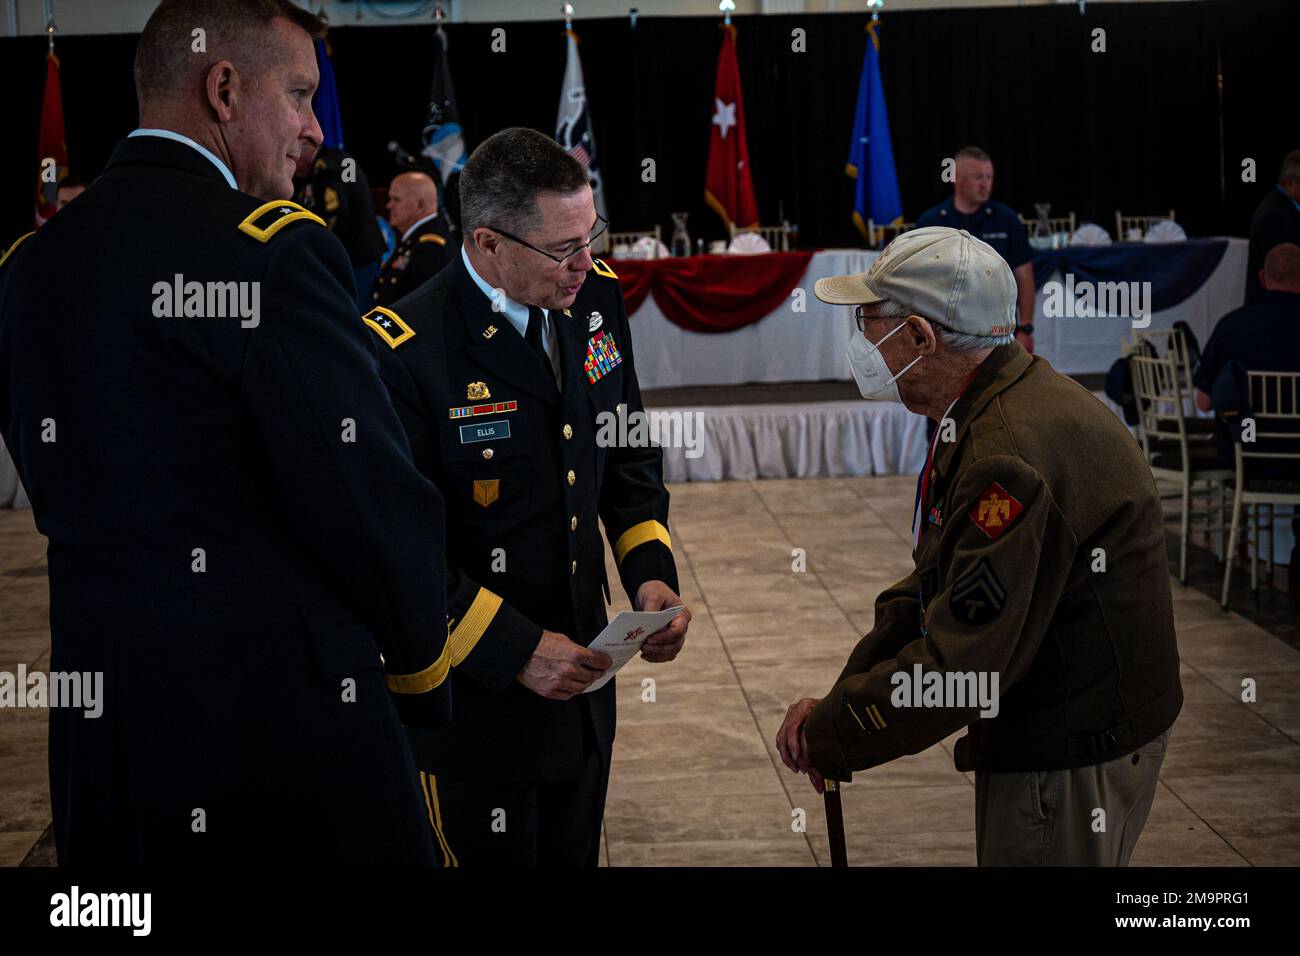 Major Gen. Lee Ellis, assistant commanding general for National Guard Affairs, U.S. Materiel Command and Brig. Gen. Ralph Hedenberg, assistant adjutant general for the Connecticut Army National Guard, speak with a World War II veteran at the 73rd annual Connecticut Armed Forces Day Luncheon May 20, 2022. The luncheon is a state tradition that dates back to the 1960s and brings together members of Connecticut’s military, veteran, civic, and business communities to celebrate military service and to honor those who have served, or continue to serve, the state and nation. Stock Photo